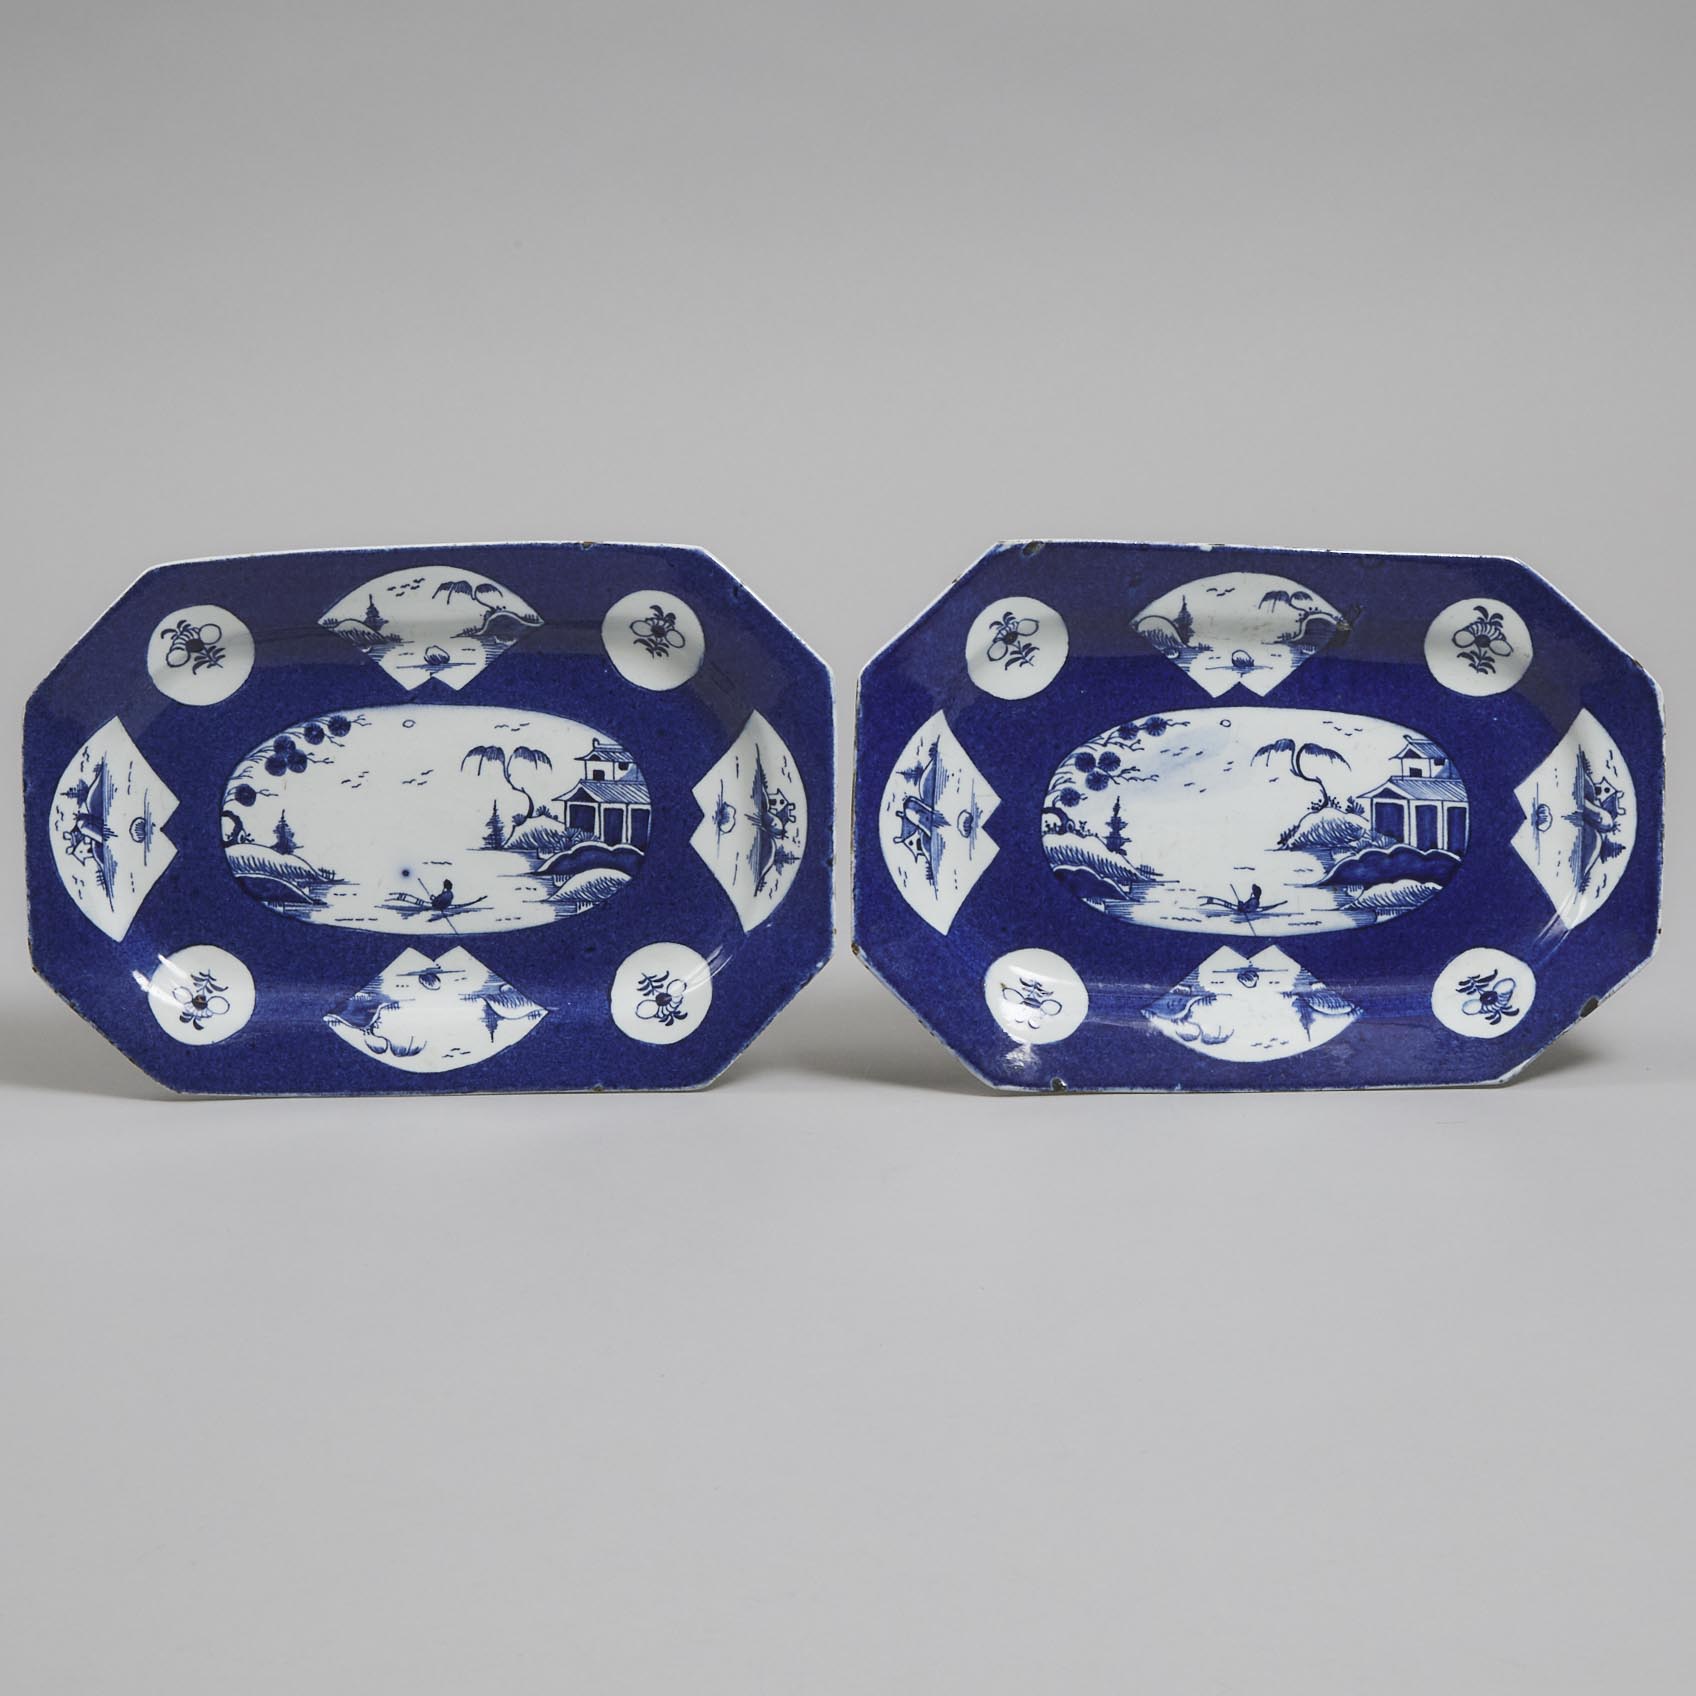 Two Bow Powder Blue Ground Small Octagonal Platters, c.1760